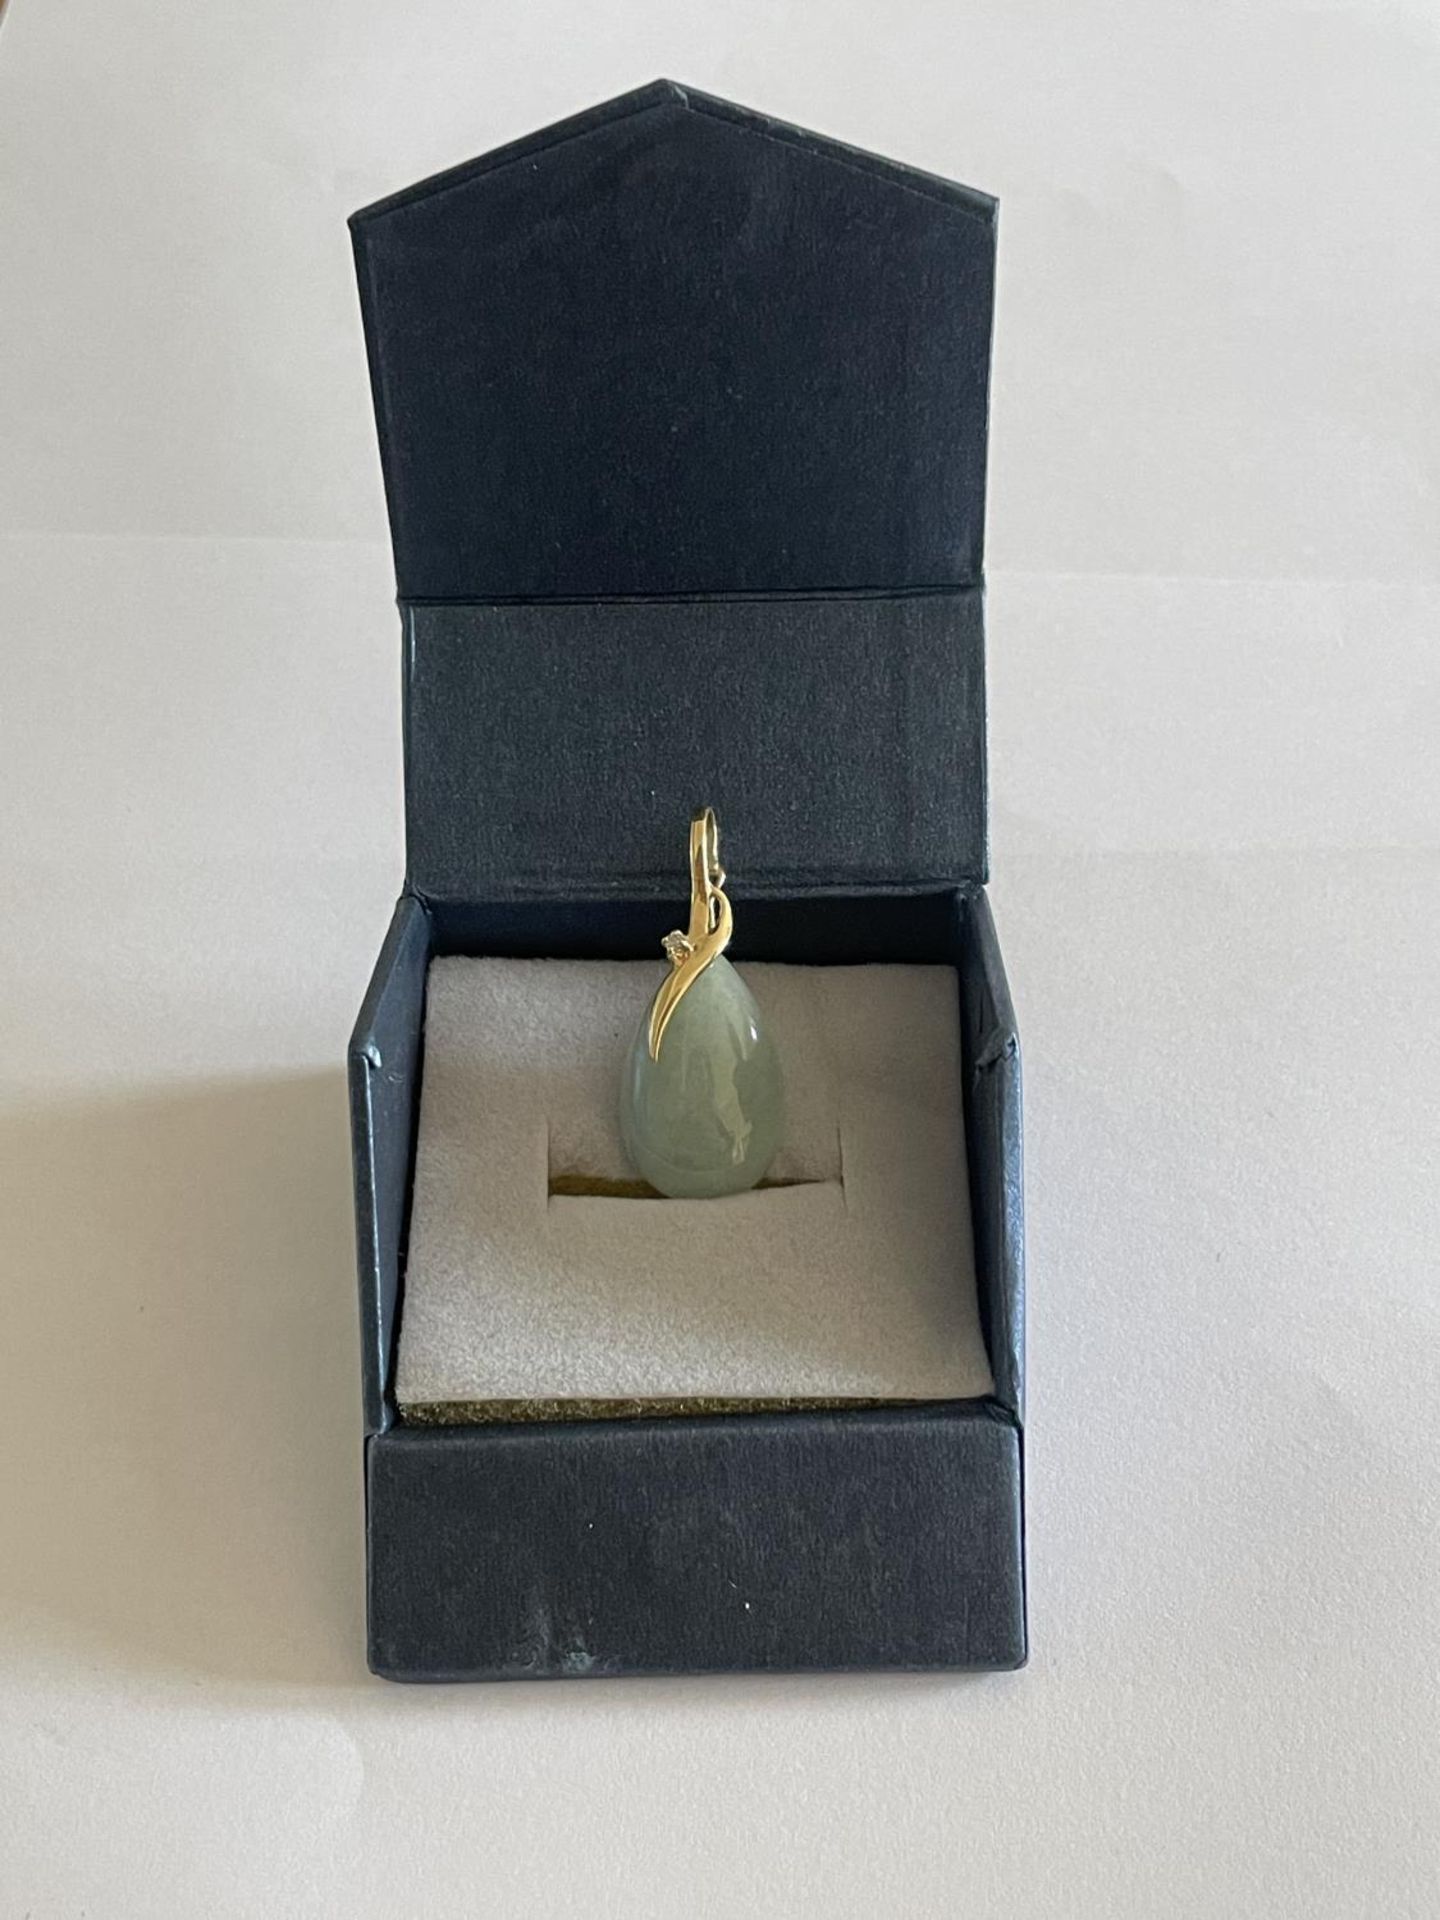 A 14 CARAT GOLD AND JADE PENDANT IN A PRESENTATION BOX - Image 3 of 3